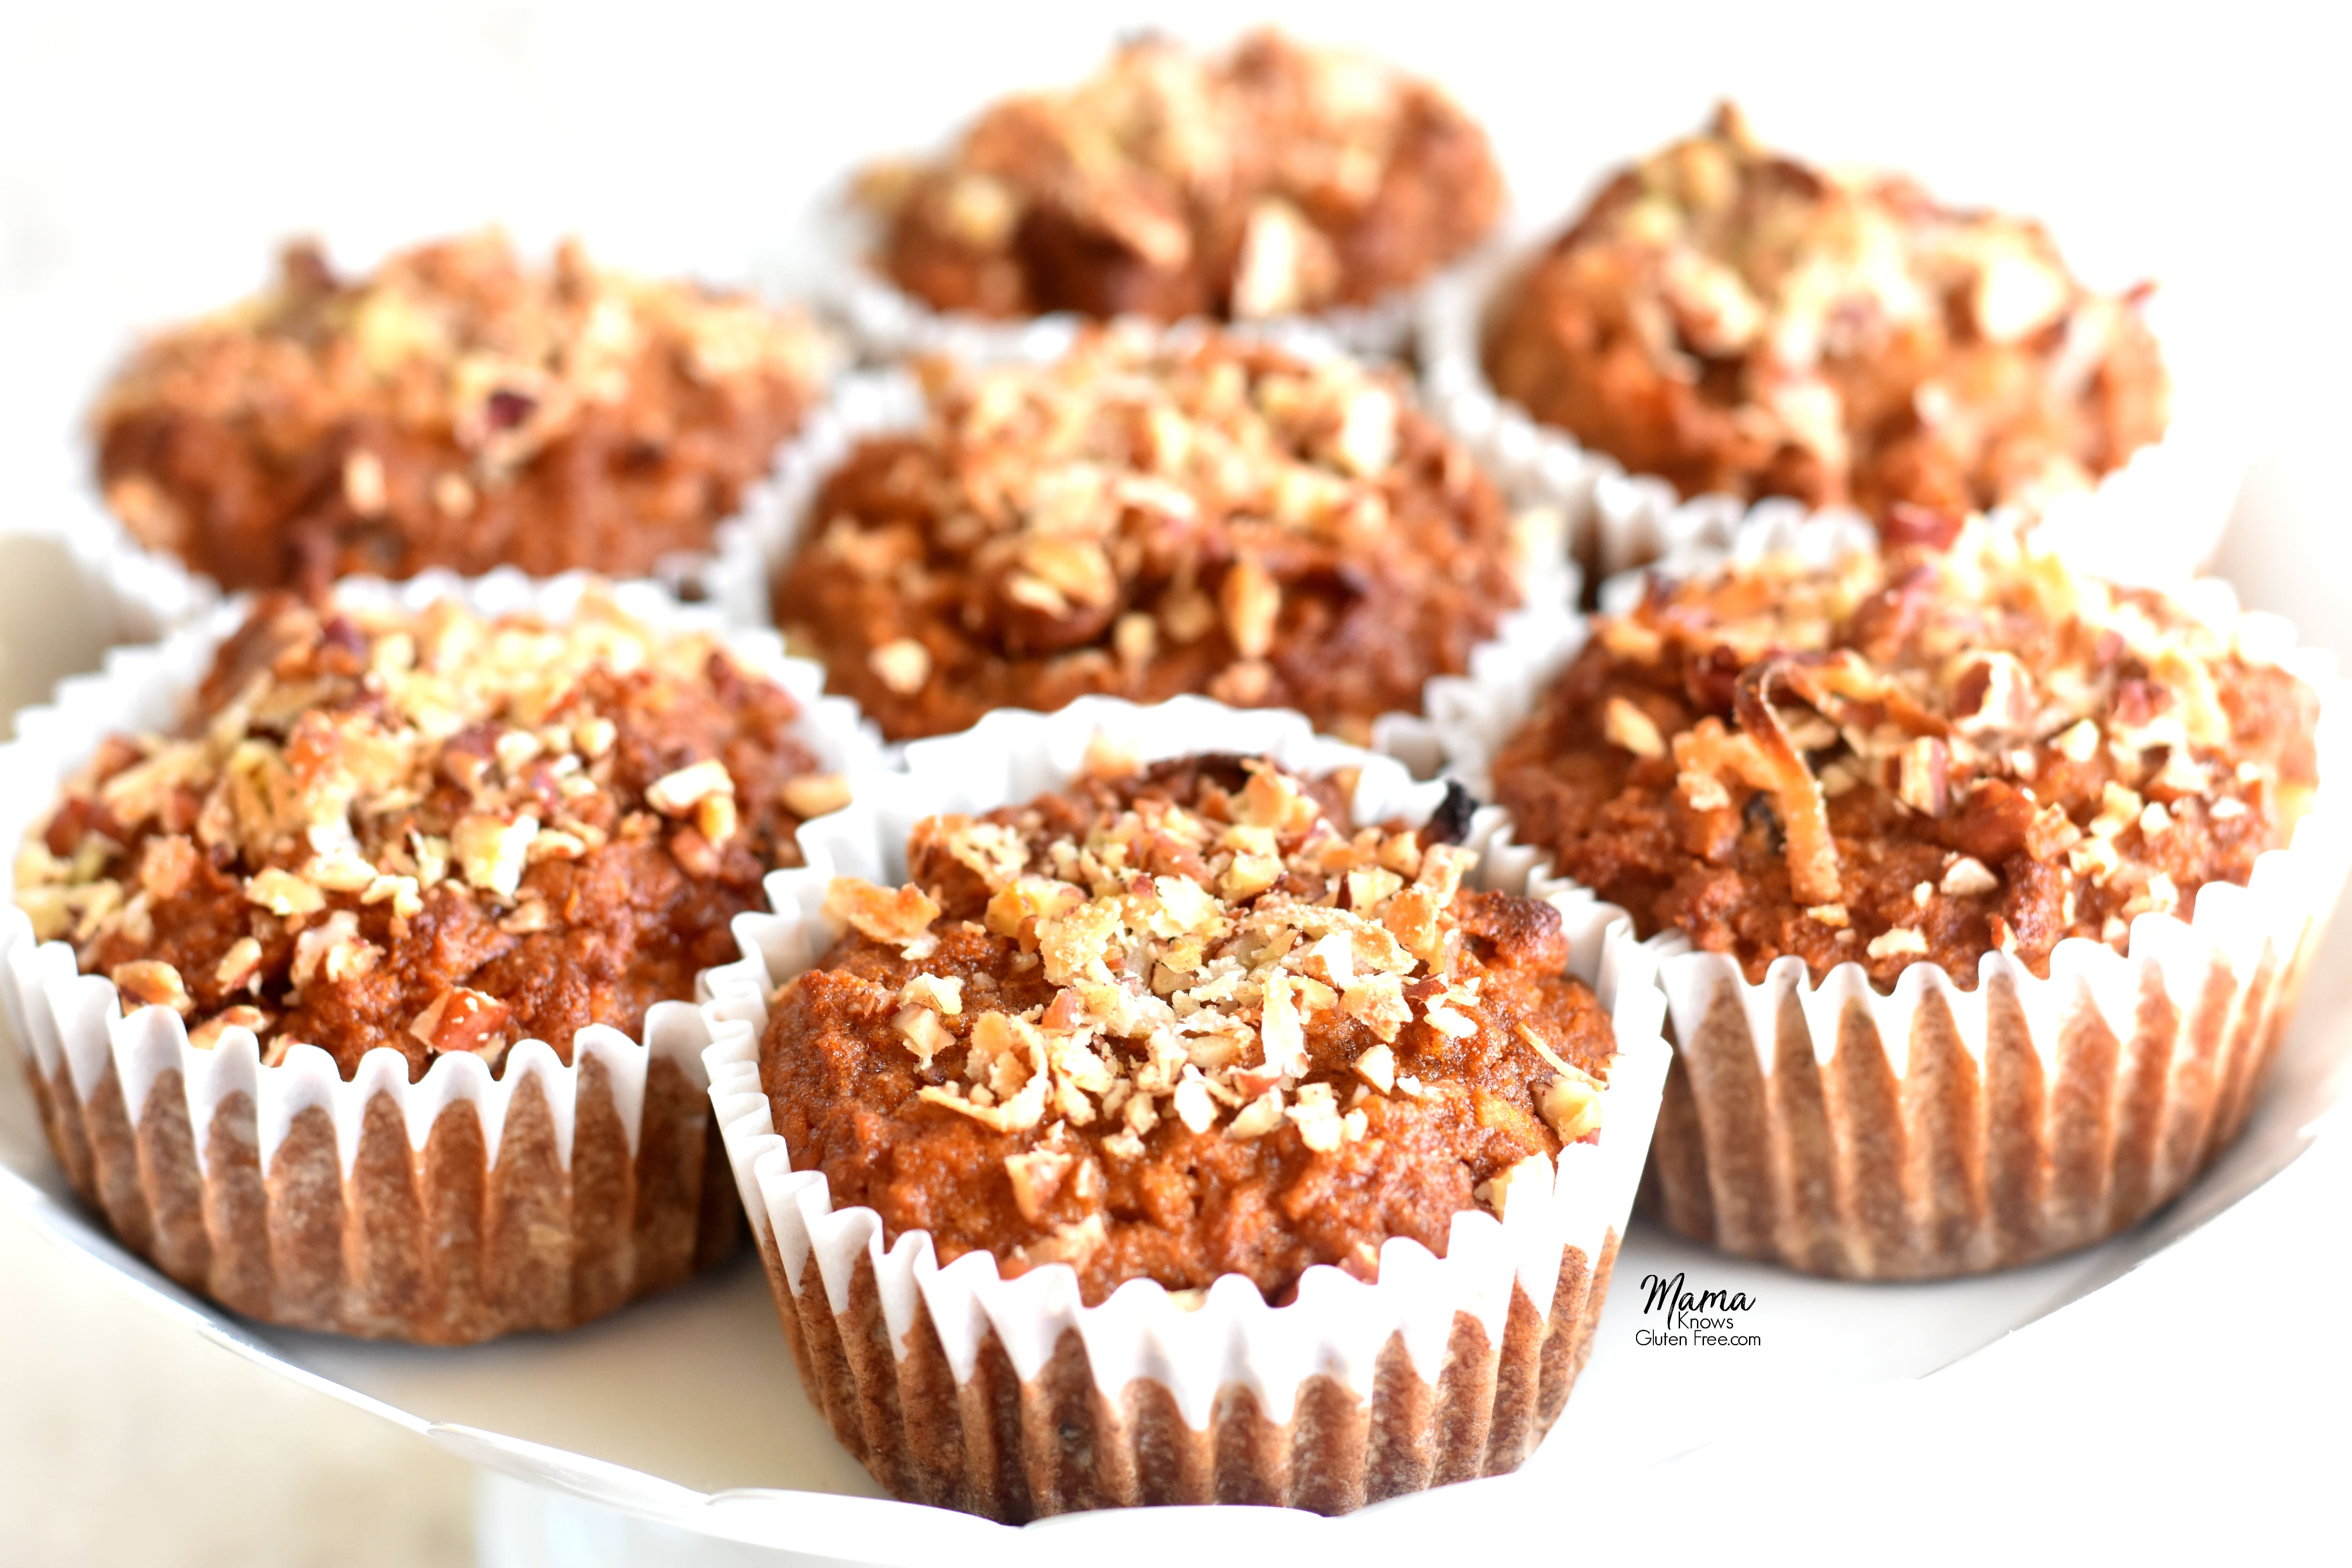 7 Paleo carrot cake muffins on a white cake stand